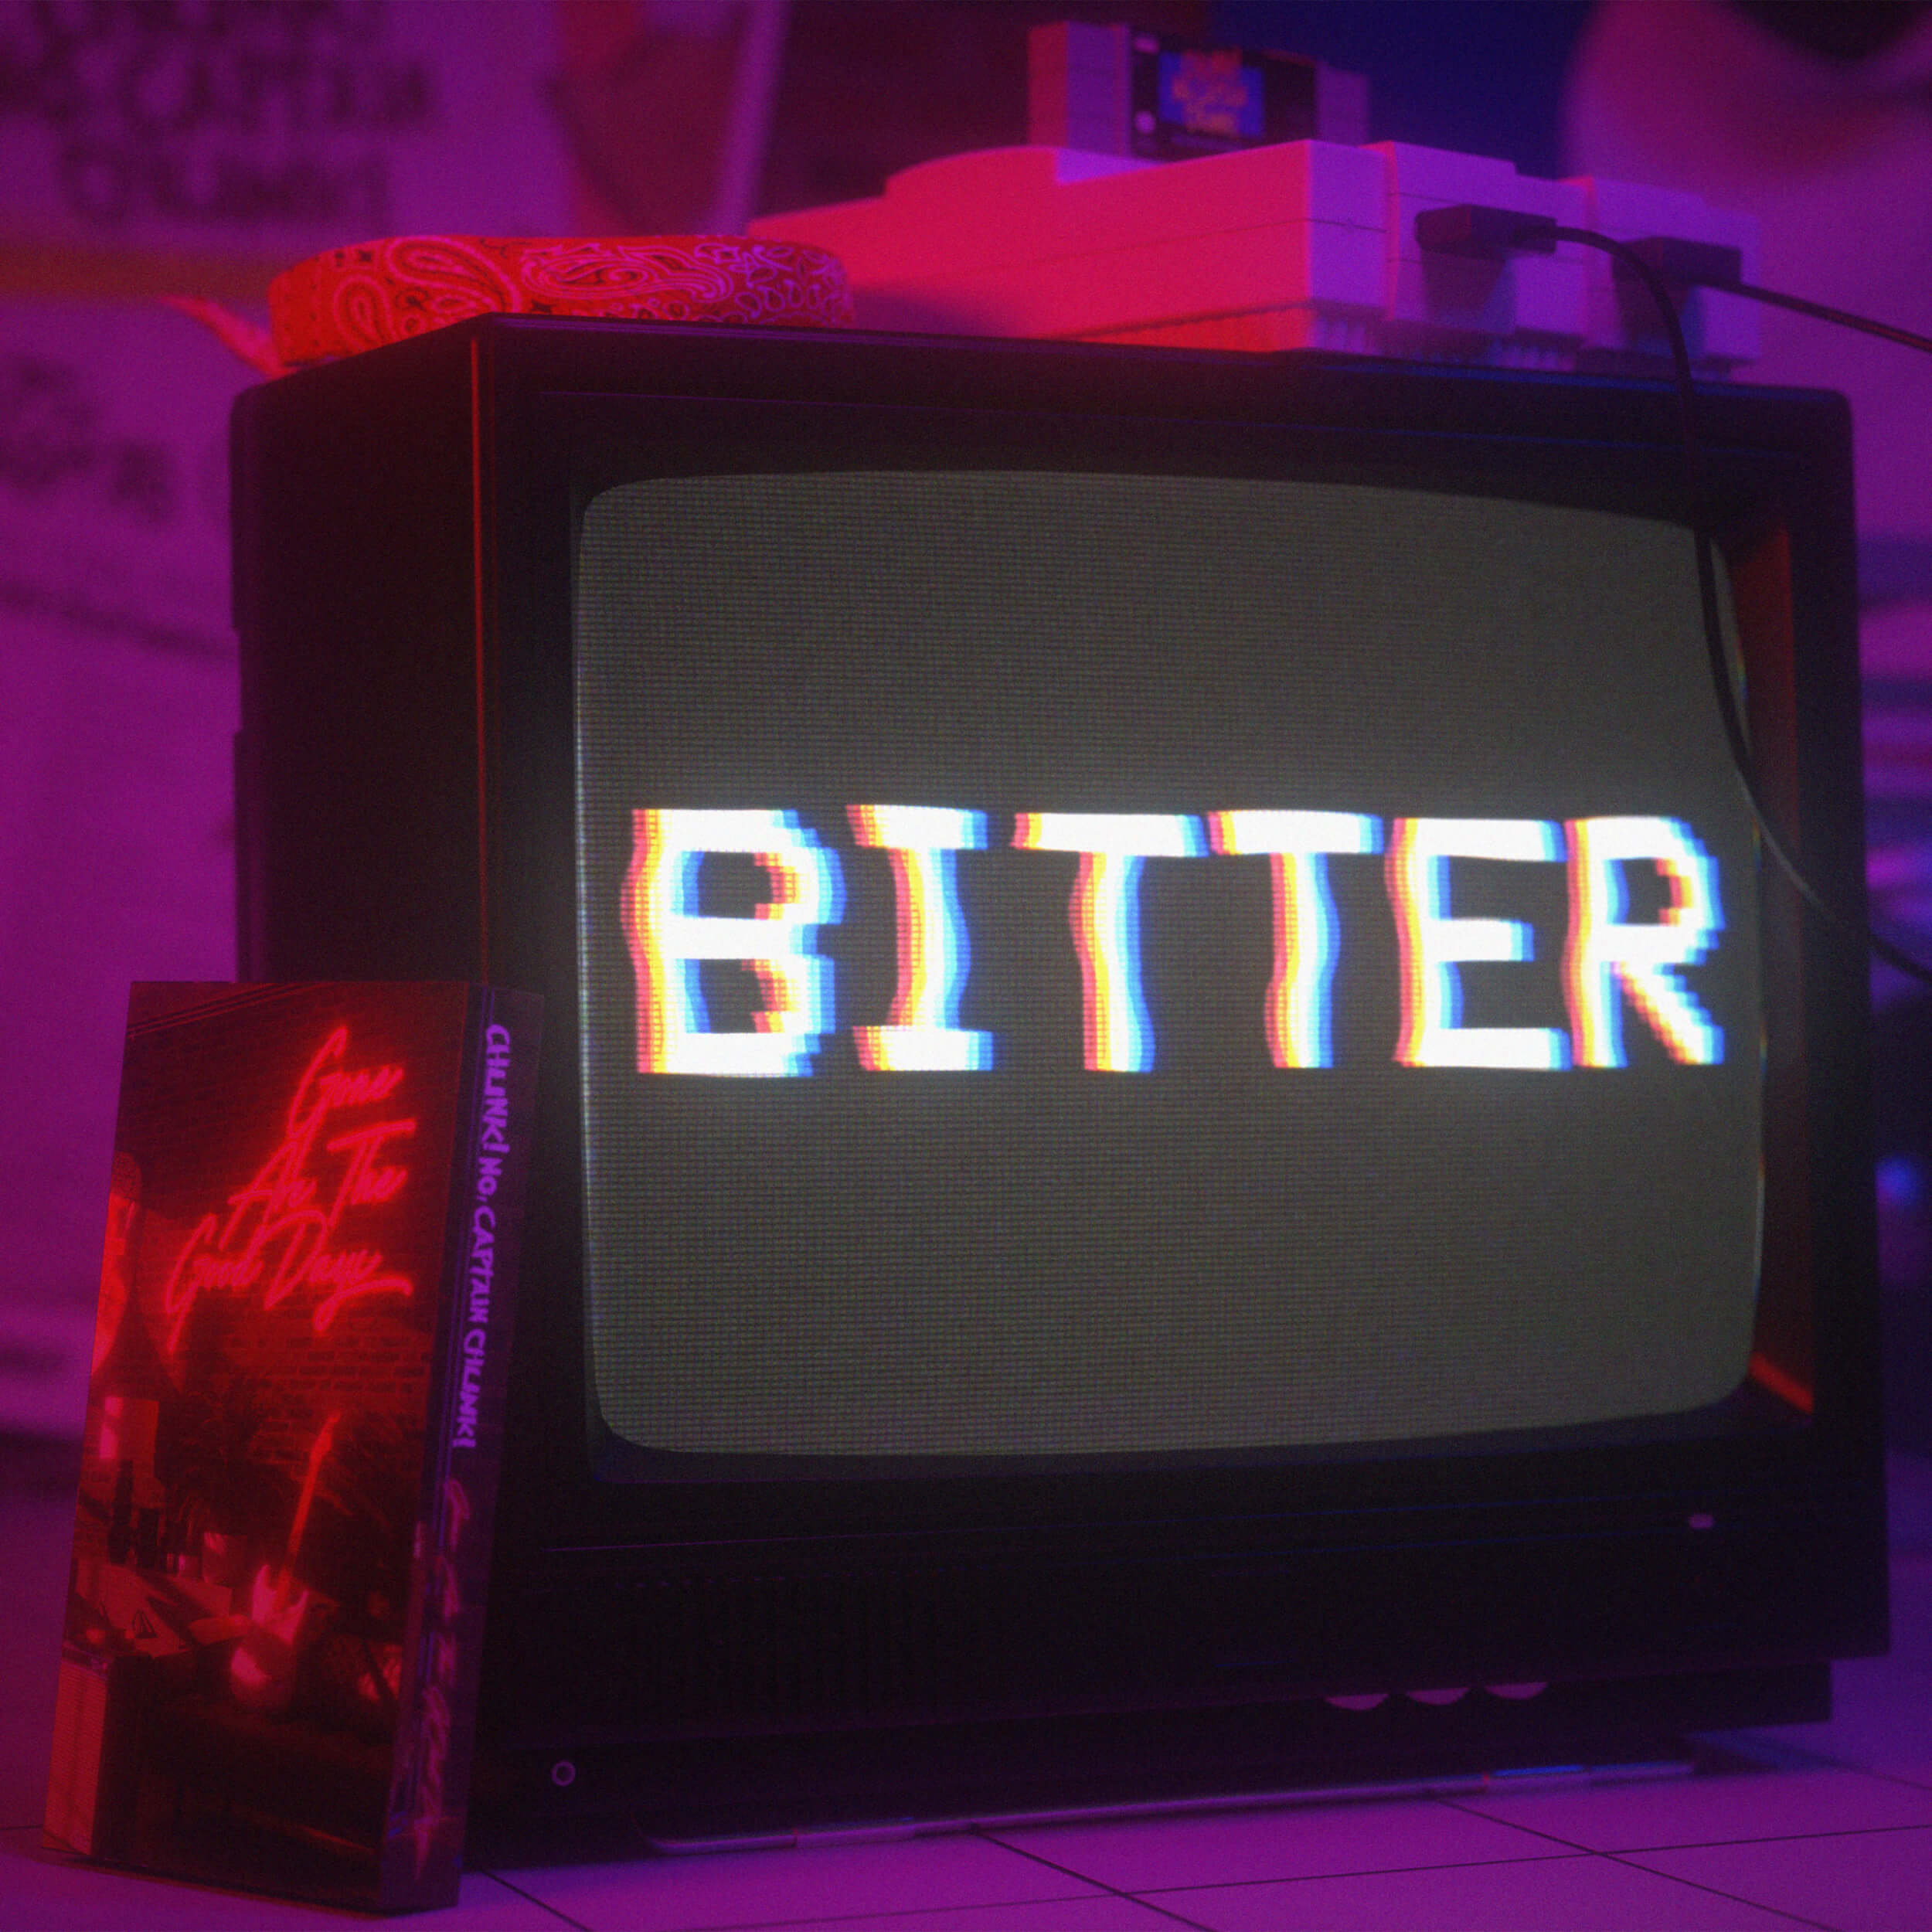 Featured image for “Bitter”